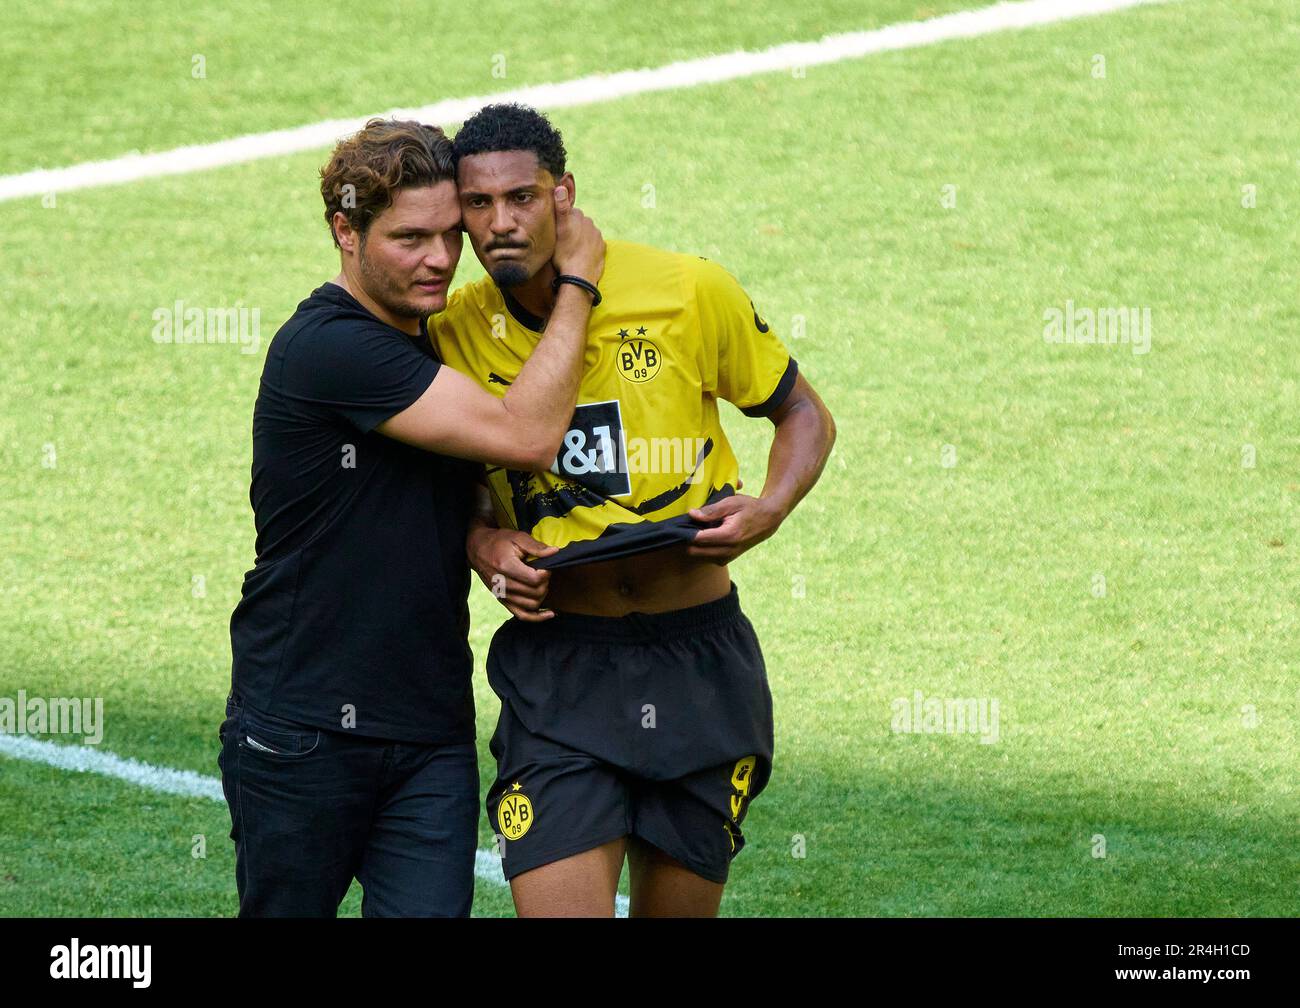 Sebastien Haller, BVB 9 Edin Terzic, head coach, Chef - Trainer BVB  after the match BORUSSIA DORTMUND - FSV MAINZ 05 2-2, BVB lost the chance for the title. 1.German Football League on May 27, 2023 in Dortmund, Germany. Season 2022/2023, matchday 34, 1.Bundesliga, 34.Spieltag, BVB, MZ,  © Peter Schatz / Alamy Live News    - DFL REGULATIONS PROHIBIT ANY USE OF PHOTOGRAPHS as IMAGE SEQUENCES and/or QUASI-VIDEO - Stock Photo